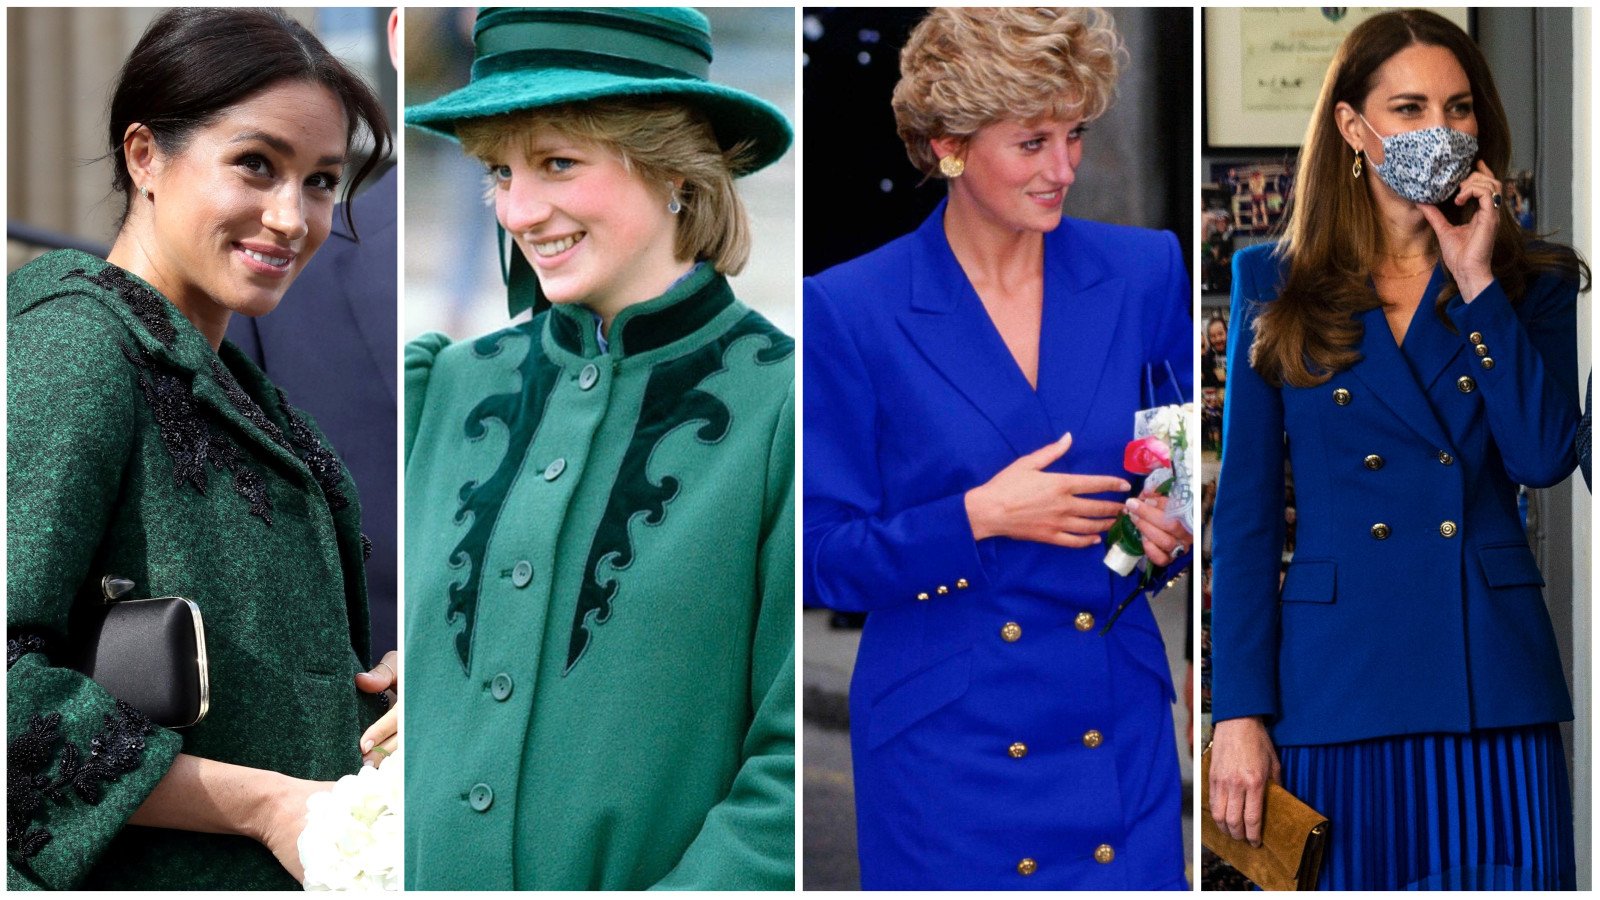 Whether intentional or by coincidence, Meghan Markle and Kate Middleton have mirrored Princess Diana’s outfits several times over the years. Photos: Reuters, @princessdianaremembered/Instagram; Getty Images, EPA-EFE